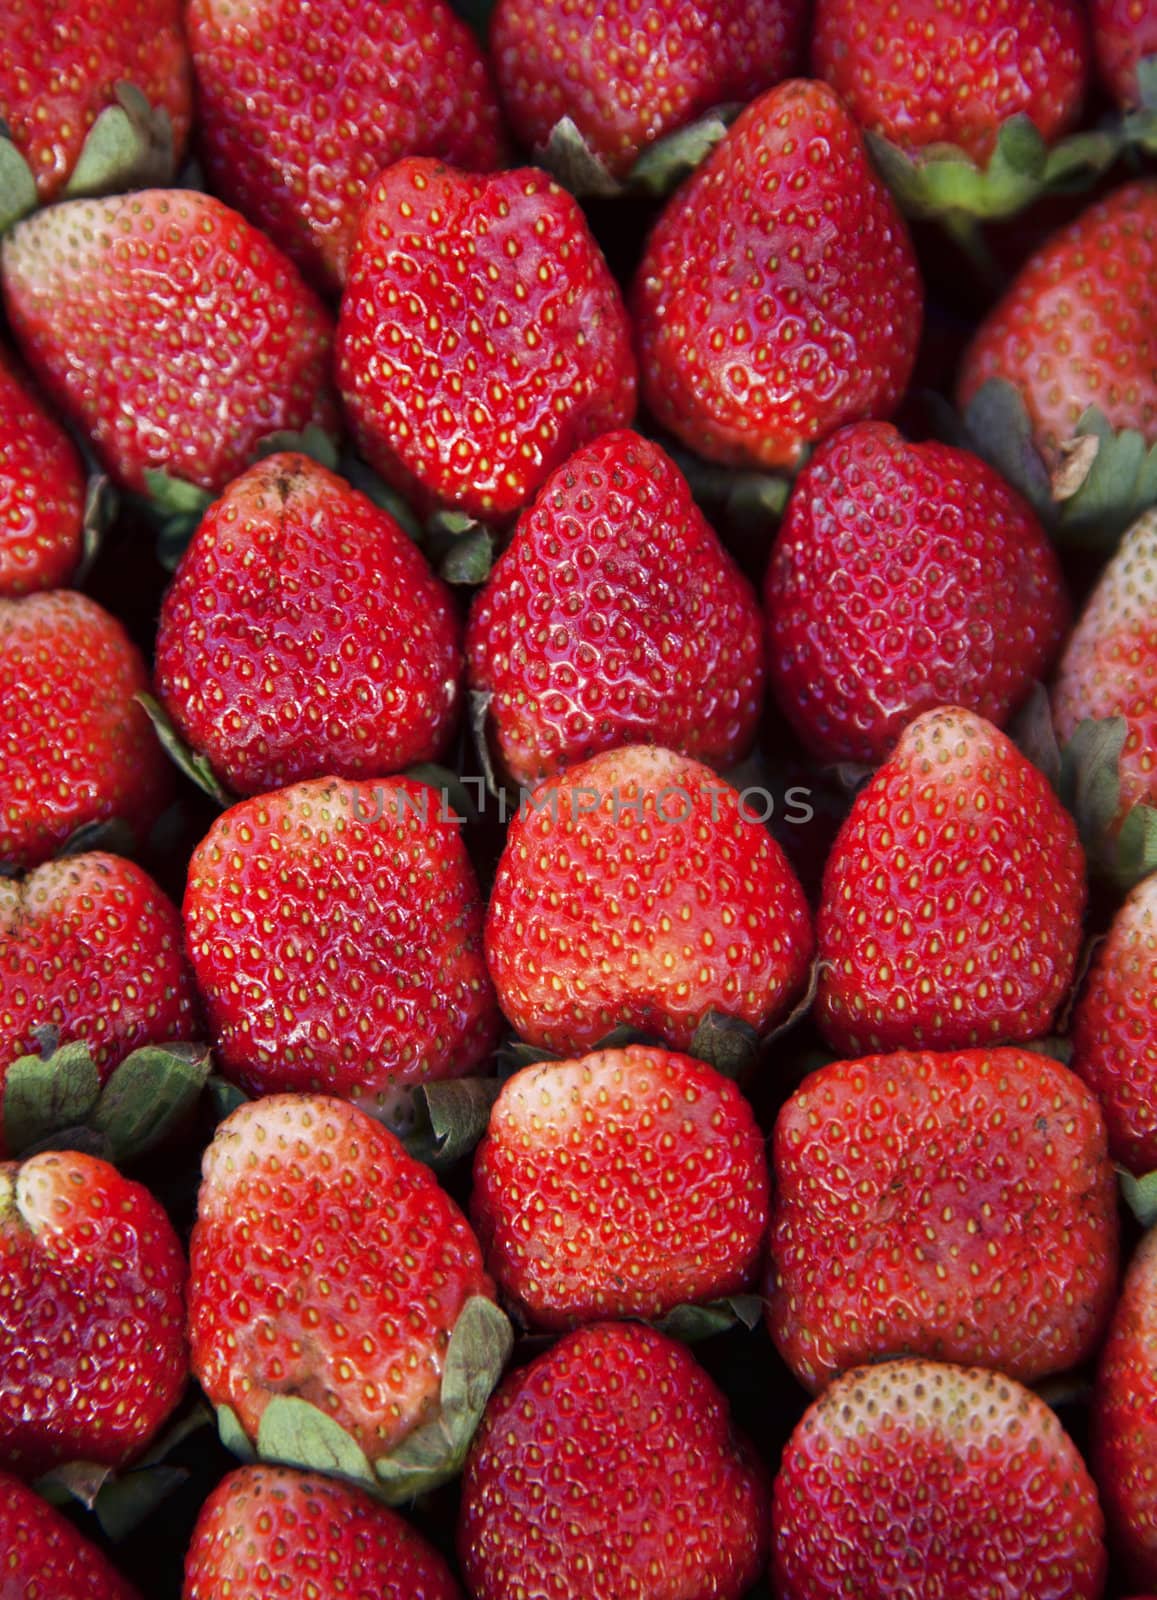 Row of strawberries on sale at market